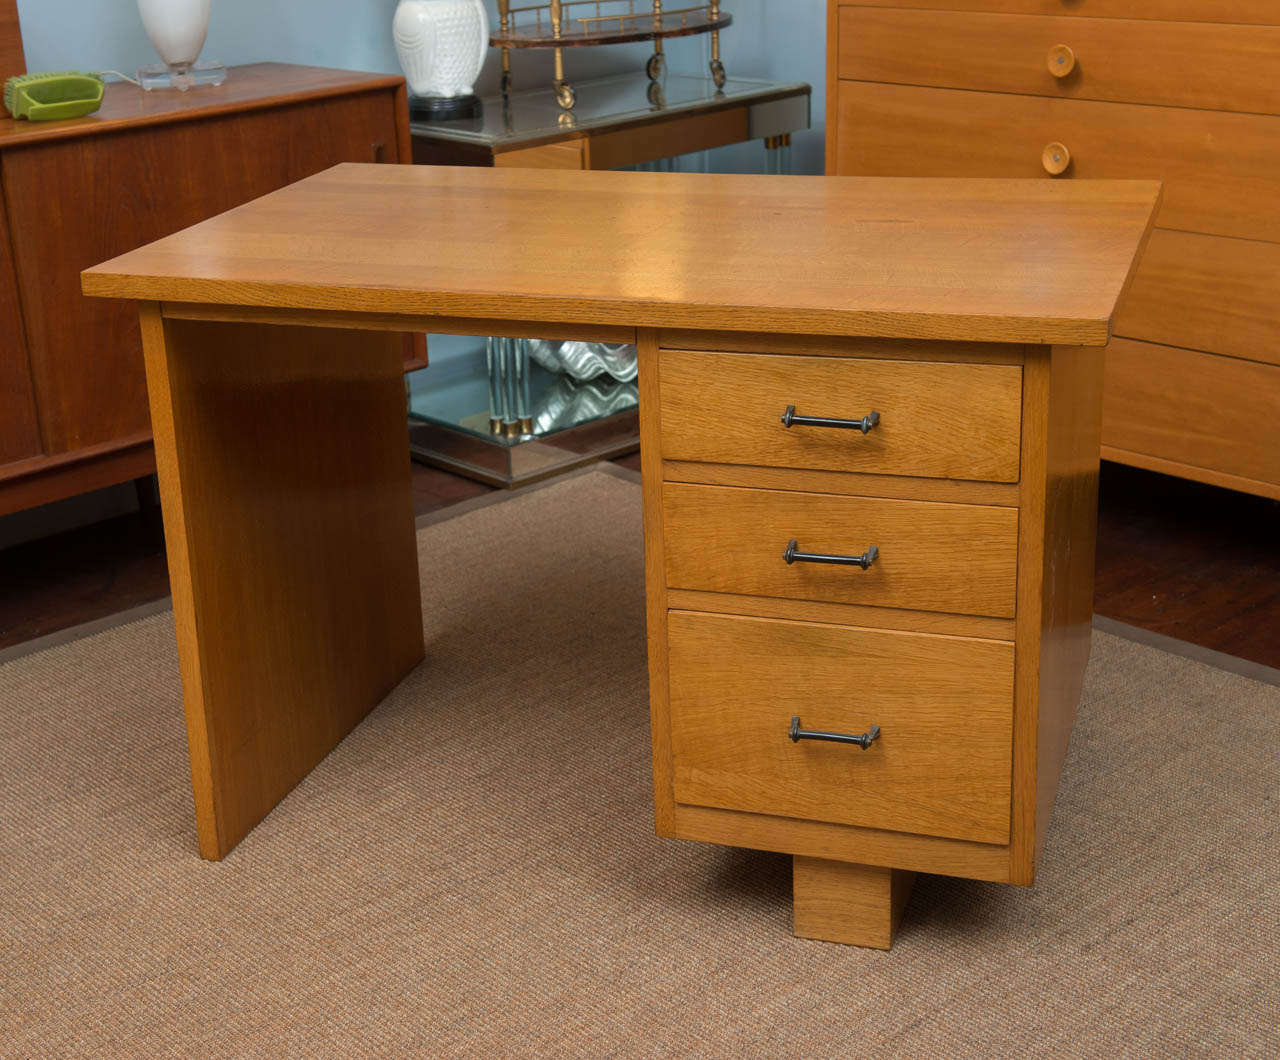 French design oak desk from the 1950's, clean and simple lines. Very good vintage condition.